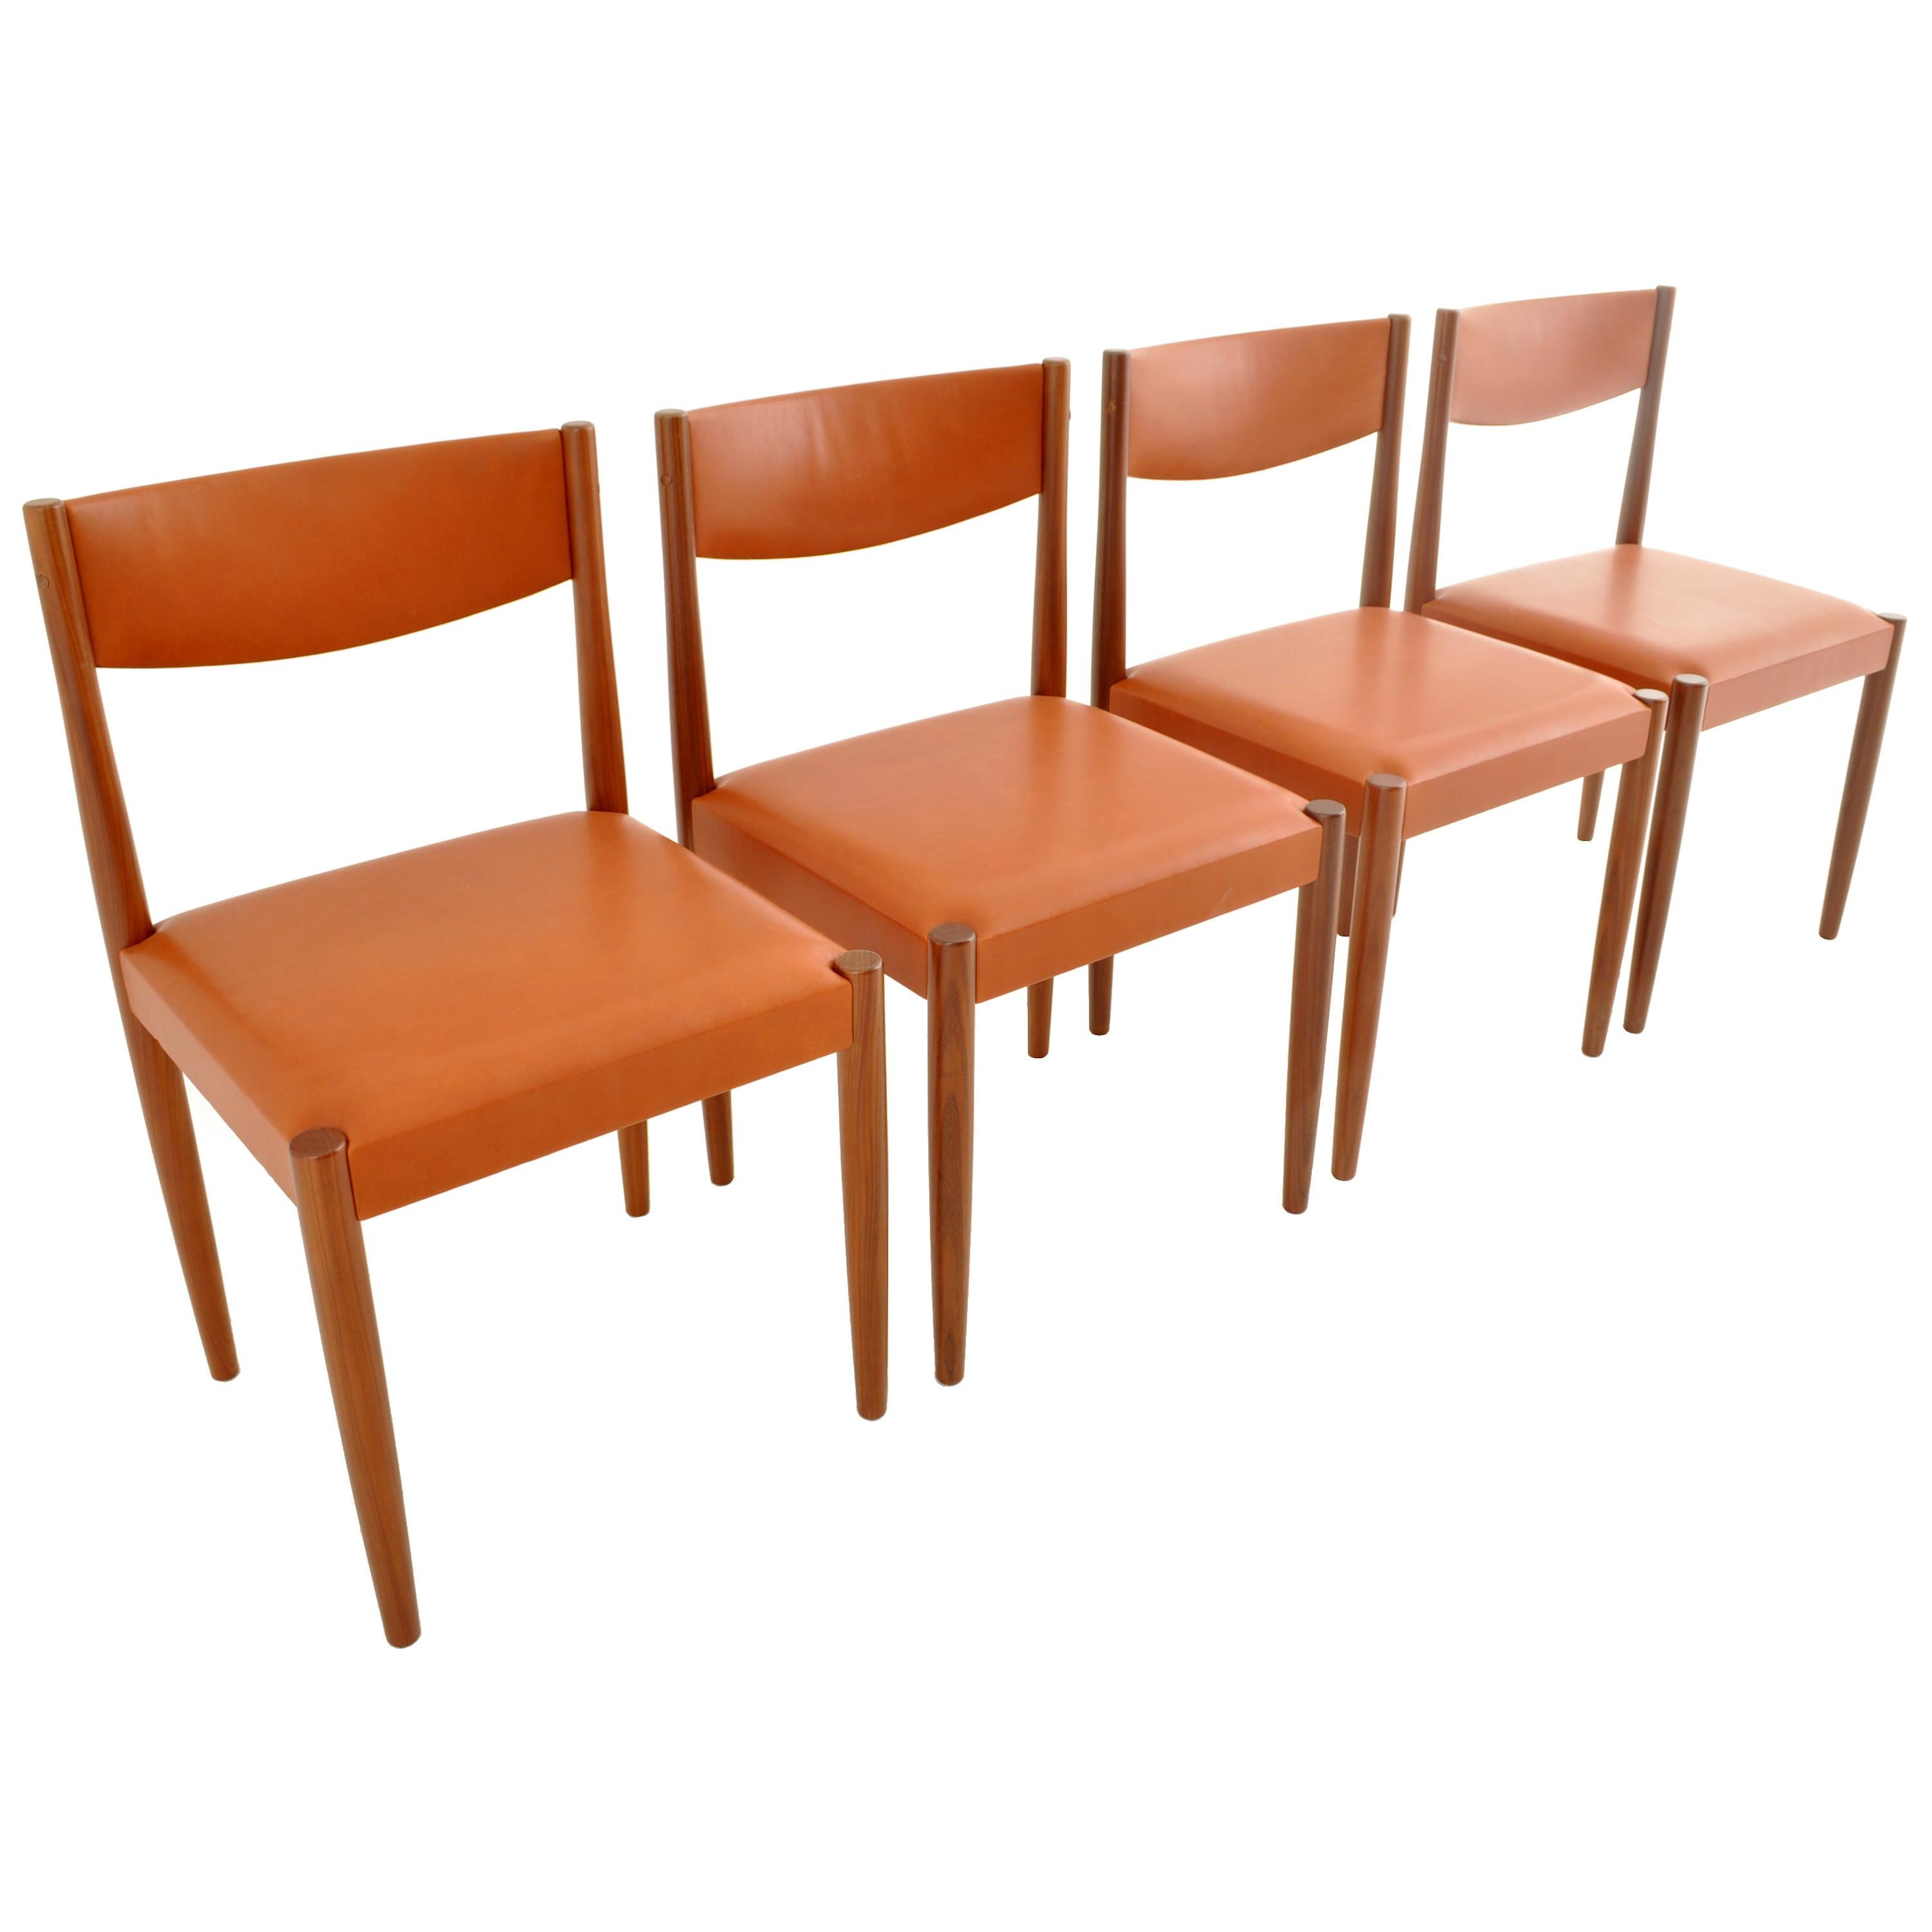 Set of four original Danish Mid-Century Modern teak dining chairs from the 1960s, in excellent condition, they are both comfortable, robust and ready to receive your dinner guests! The chairs having curved back supports and square seats and raised